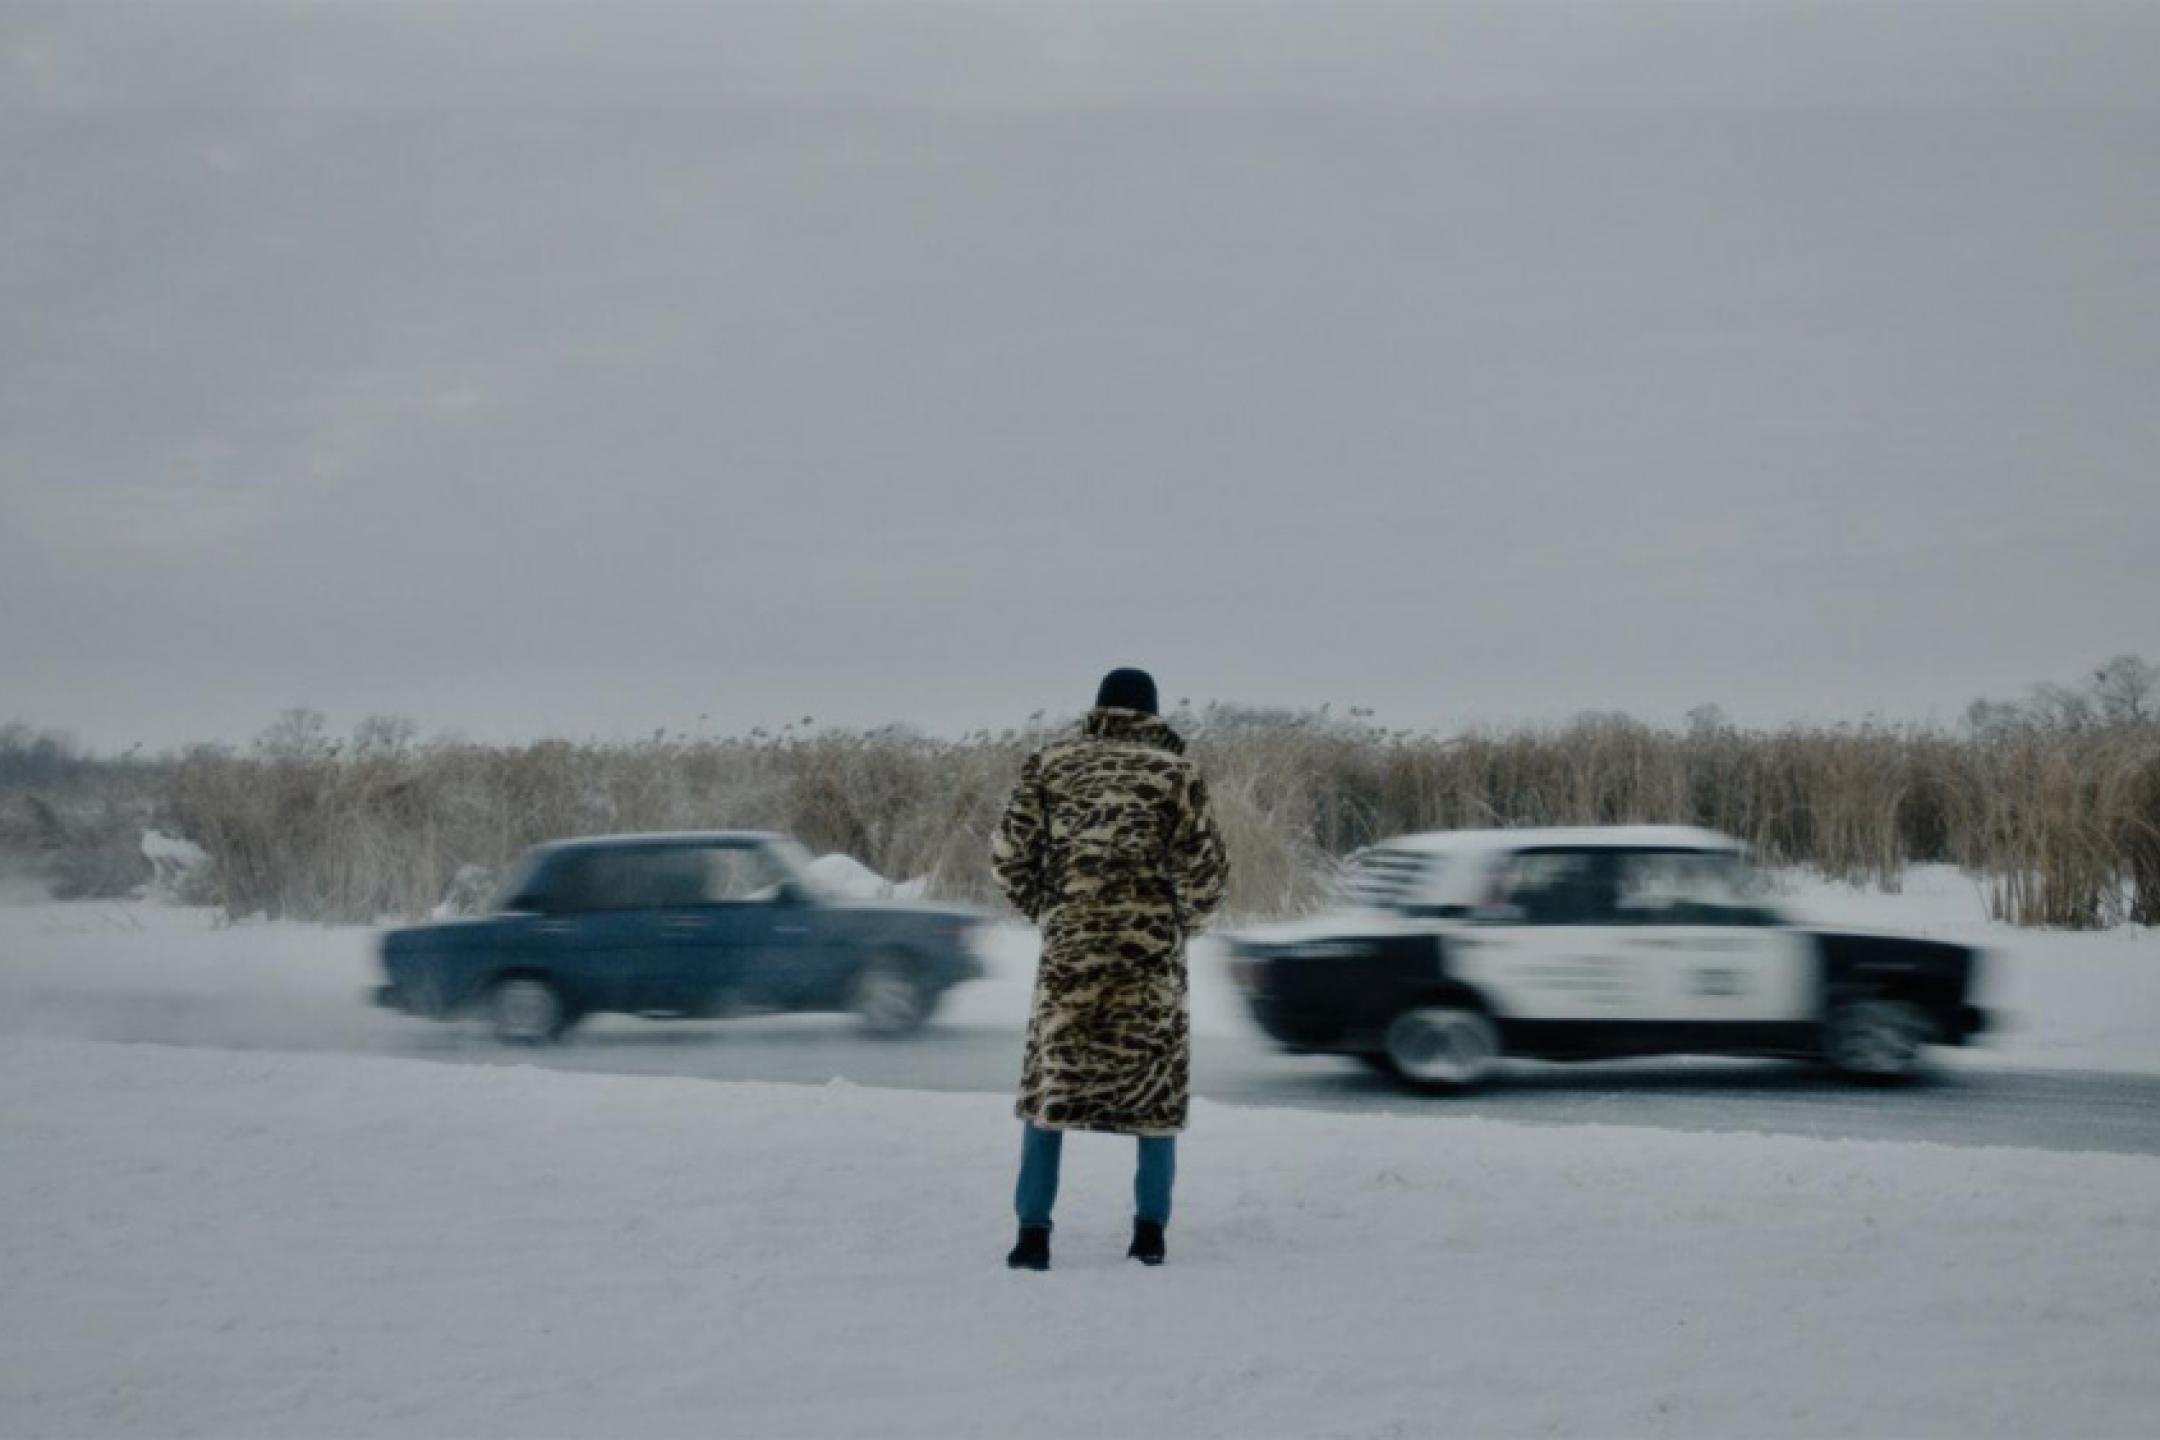 A street covered with snow in winter: A man with a leopard fur coat is watching two cars racing through the snow.